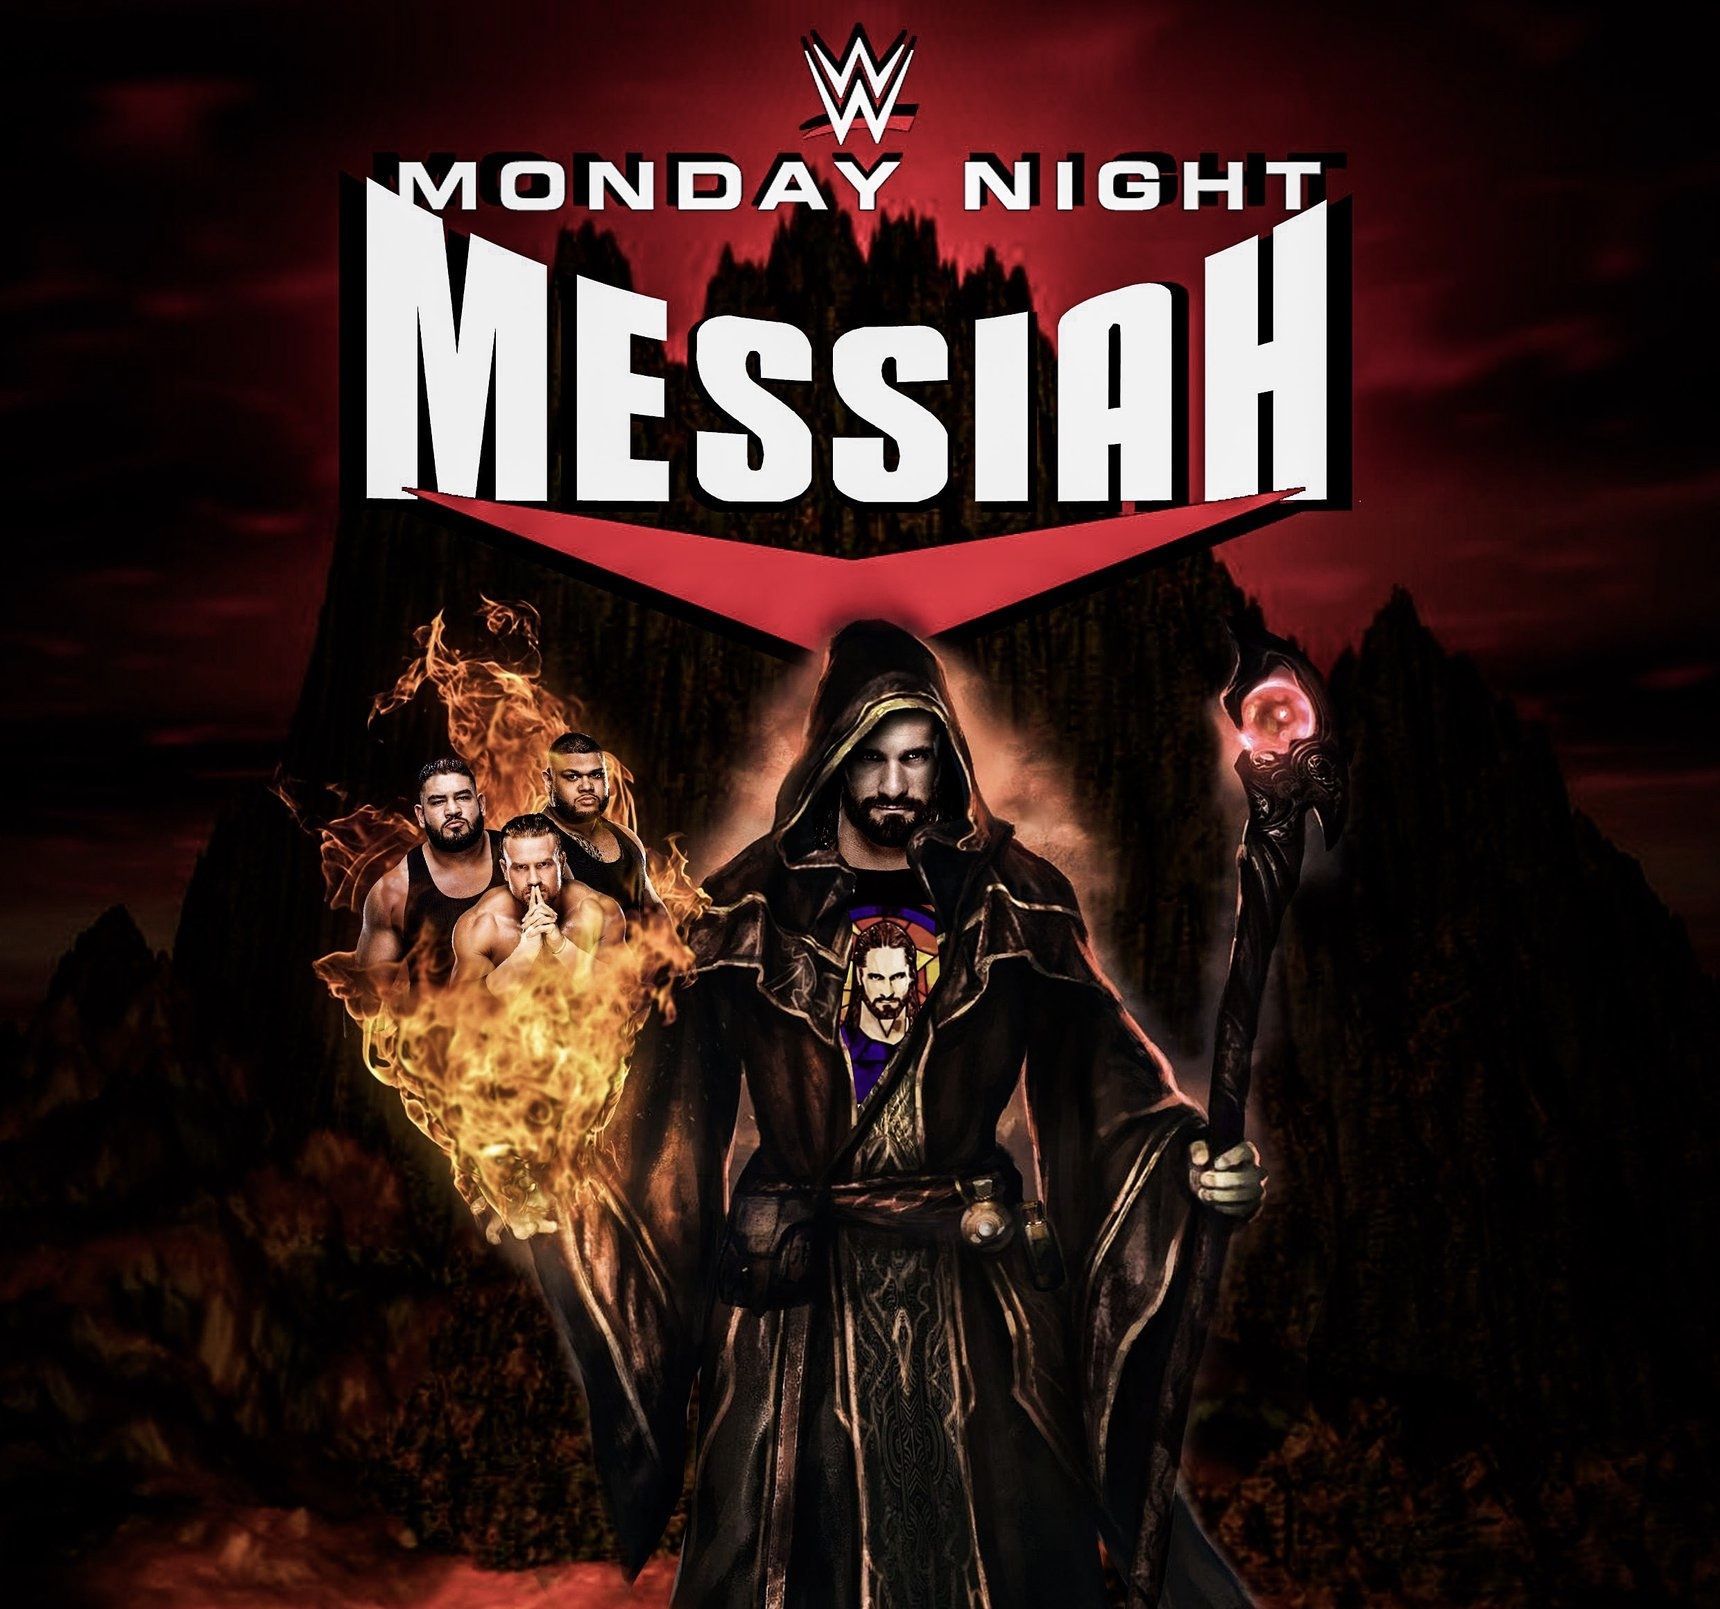 Monday Night Messiah: Seth Rollins with Akam Rezar & Buddy Murphy. Wwe seth rollins, Seth rollins, Wwe wallpaper